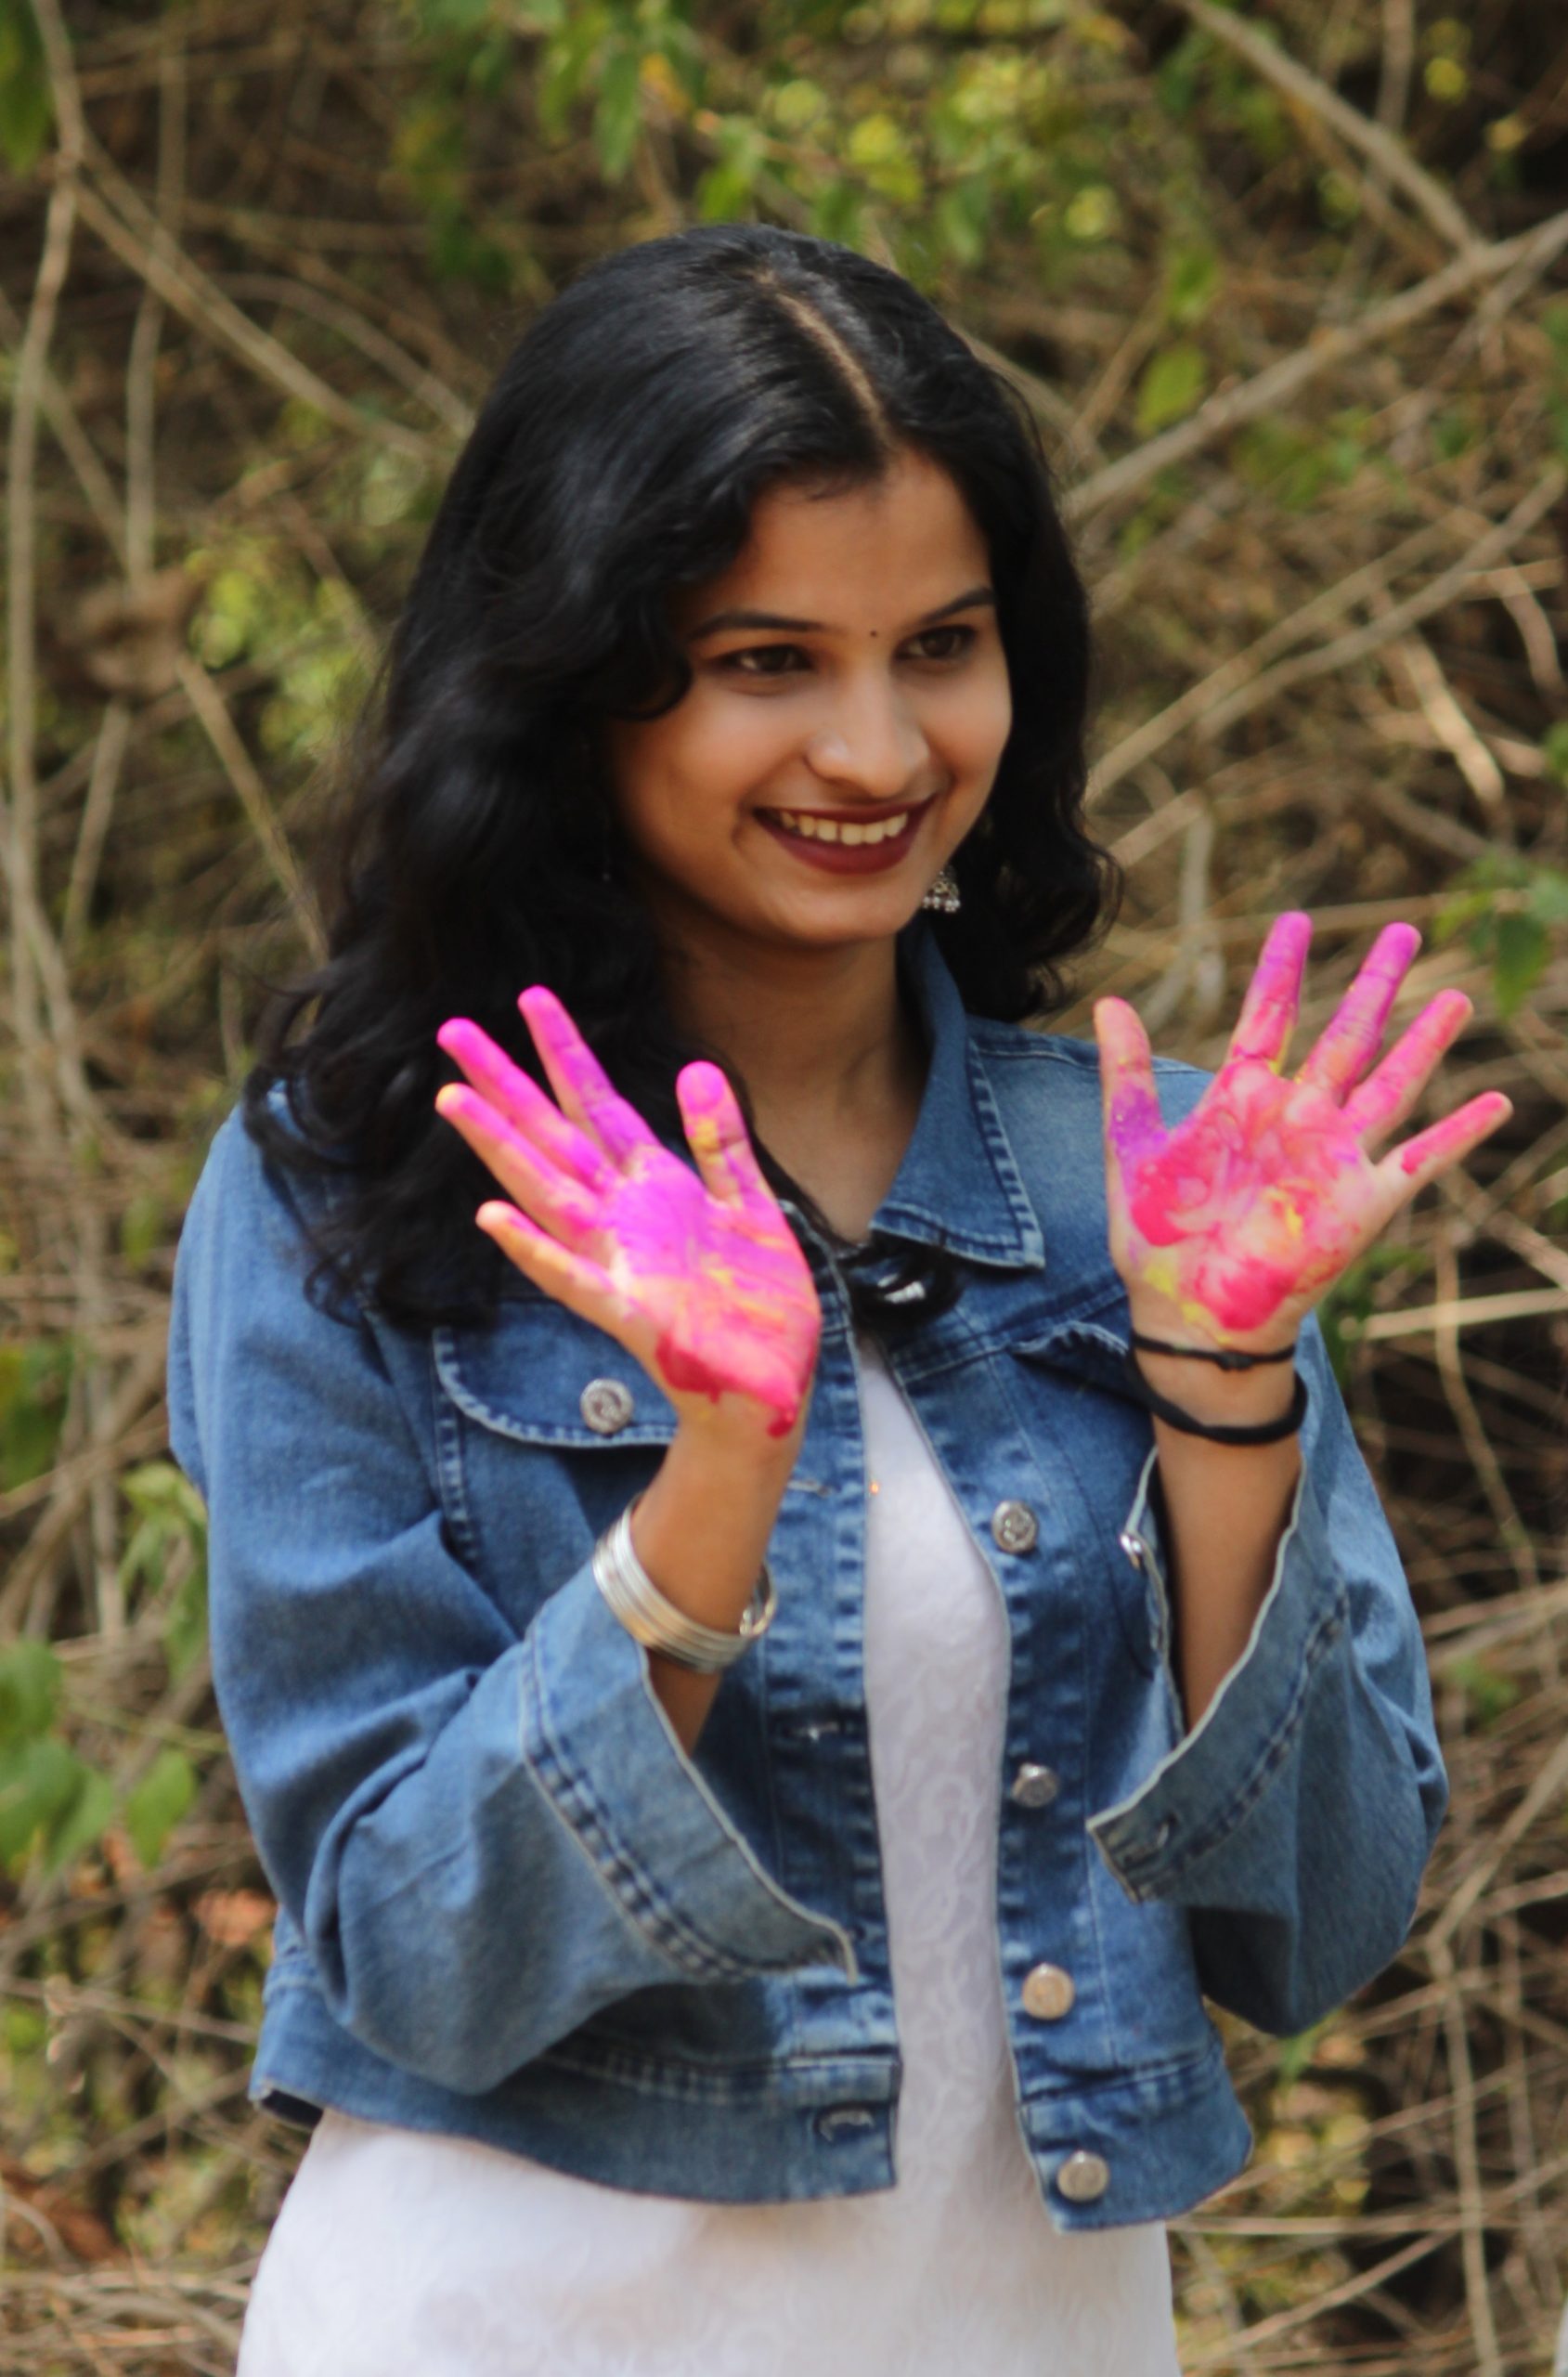 A girl showing her hands painted with Holi colors